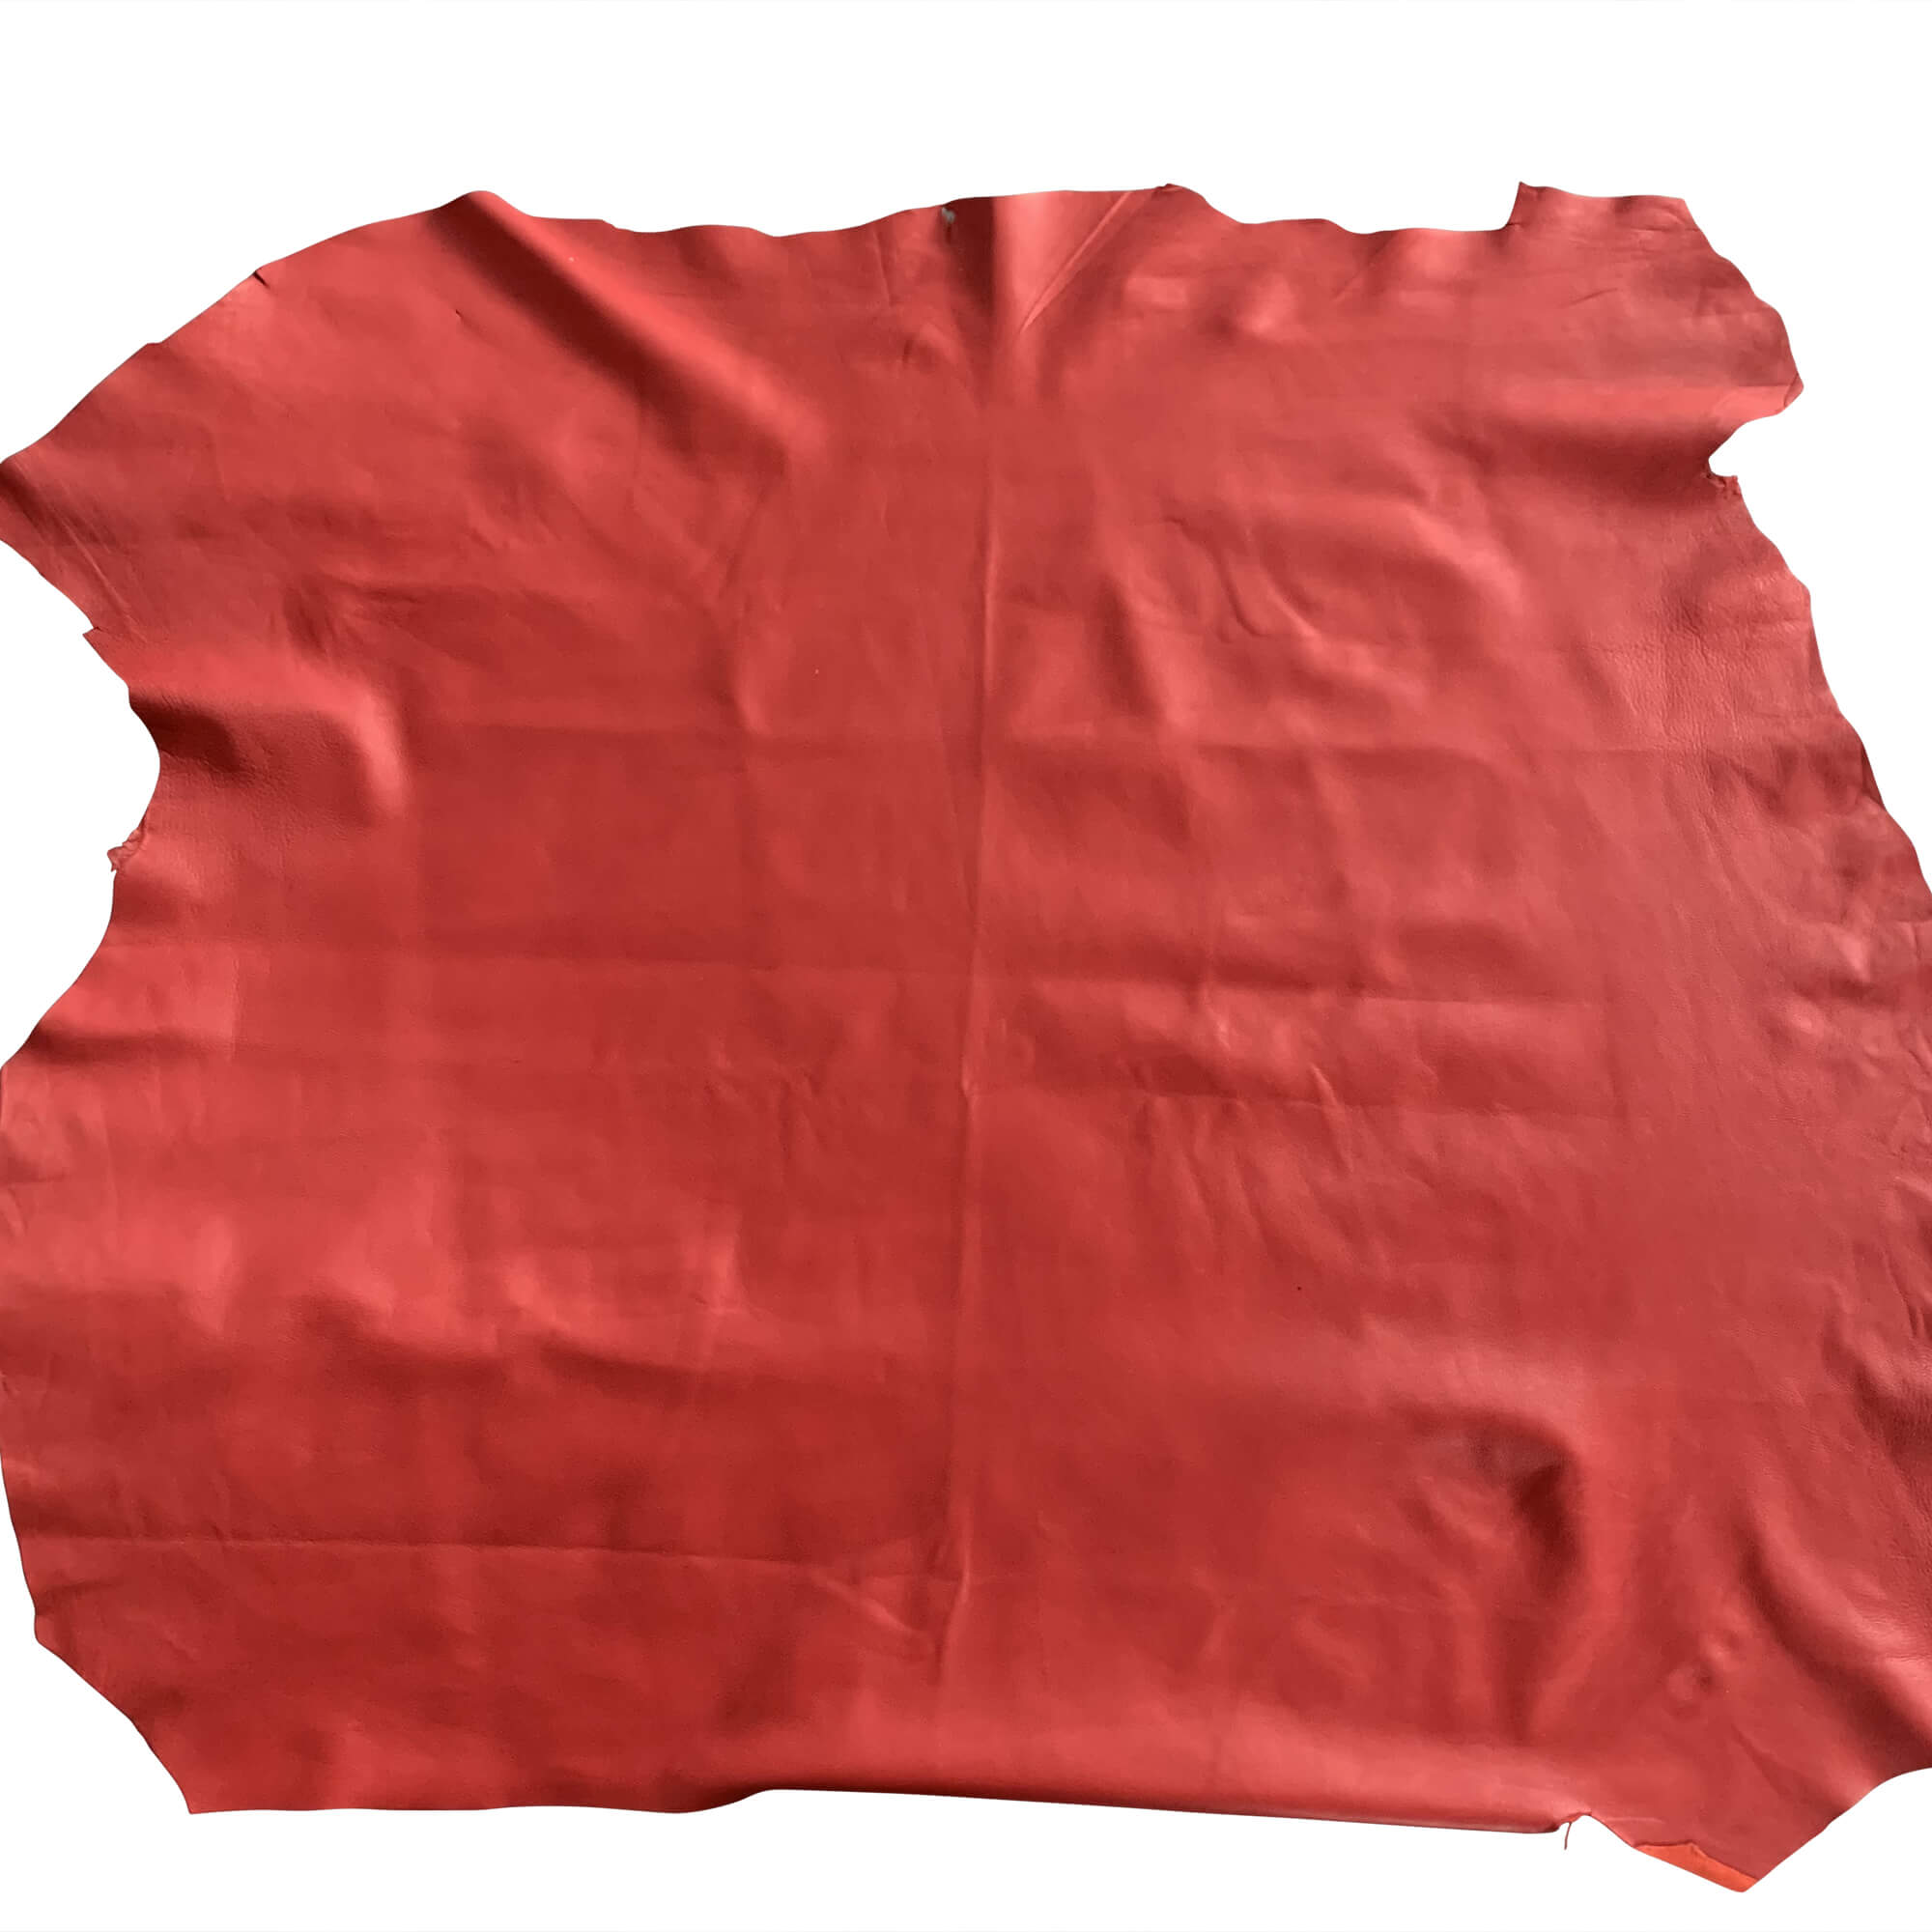 Genuine lambskin leather in red